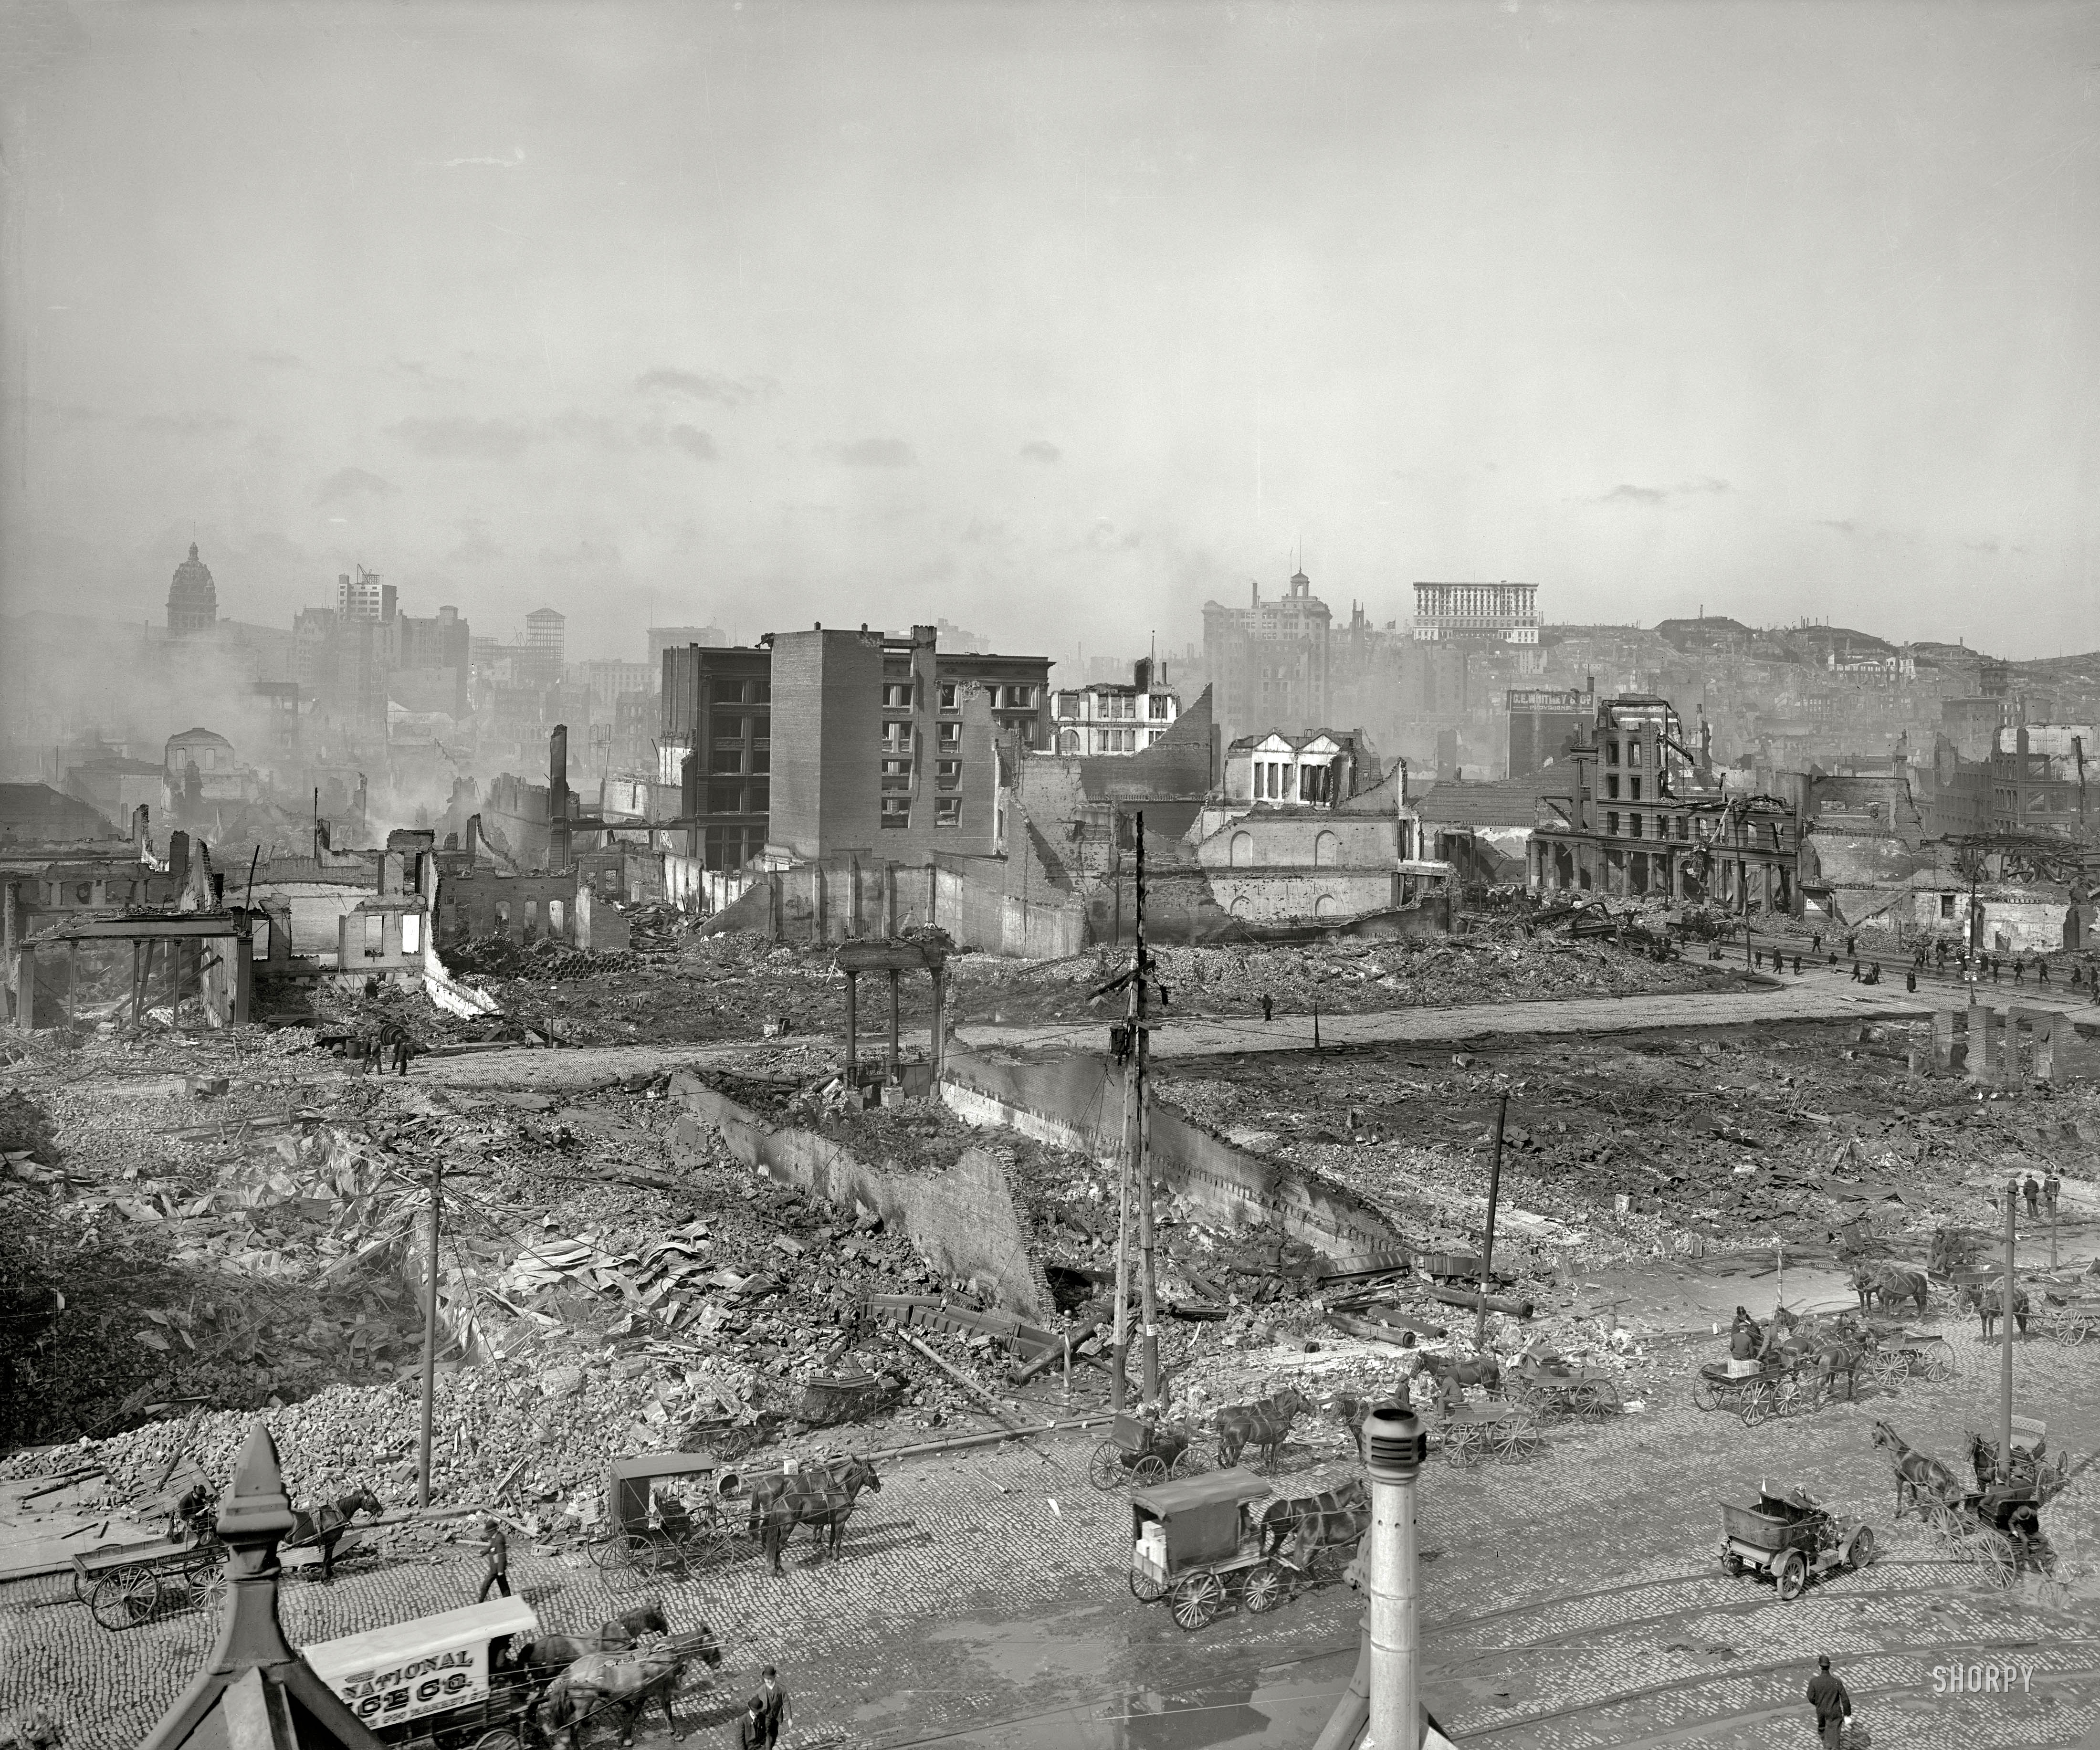 "Nob Hill from roof of Ferry Post Office." San Francisco after the earthquake and fire of April 18, 1906. Detroit Publishing glass negative. View full size.